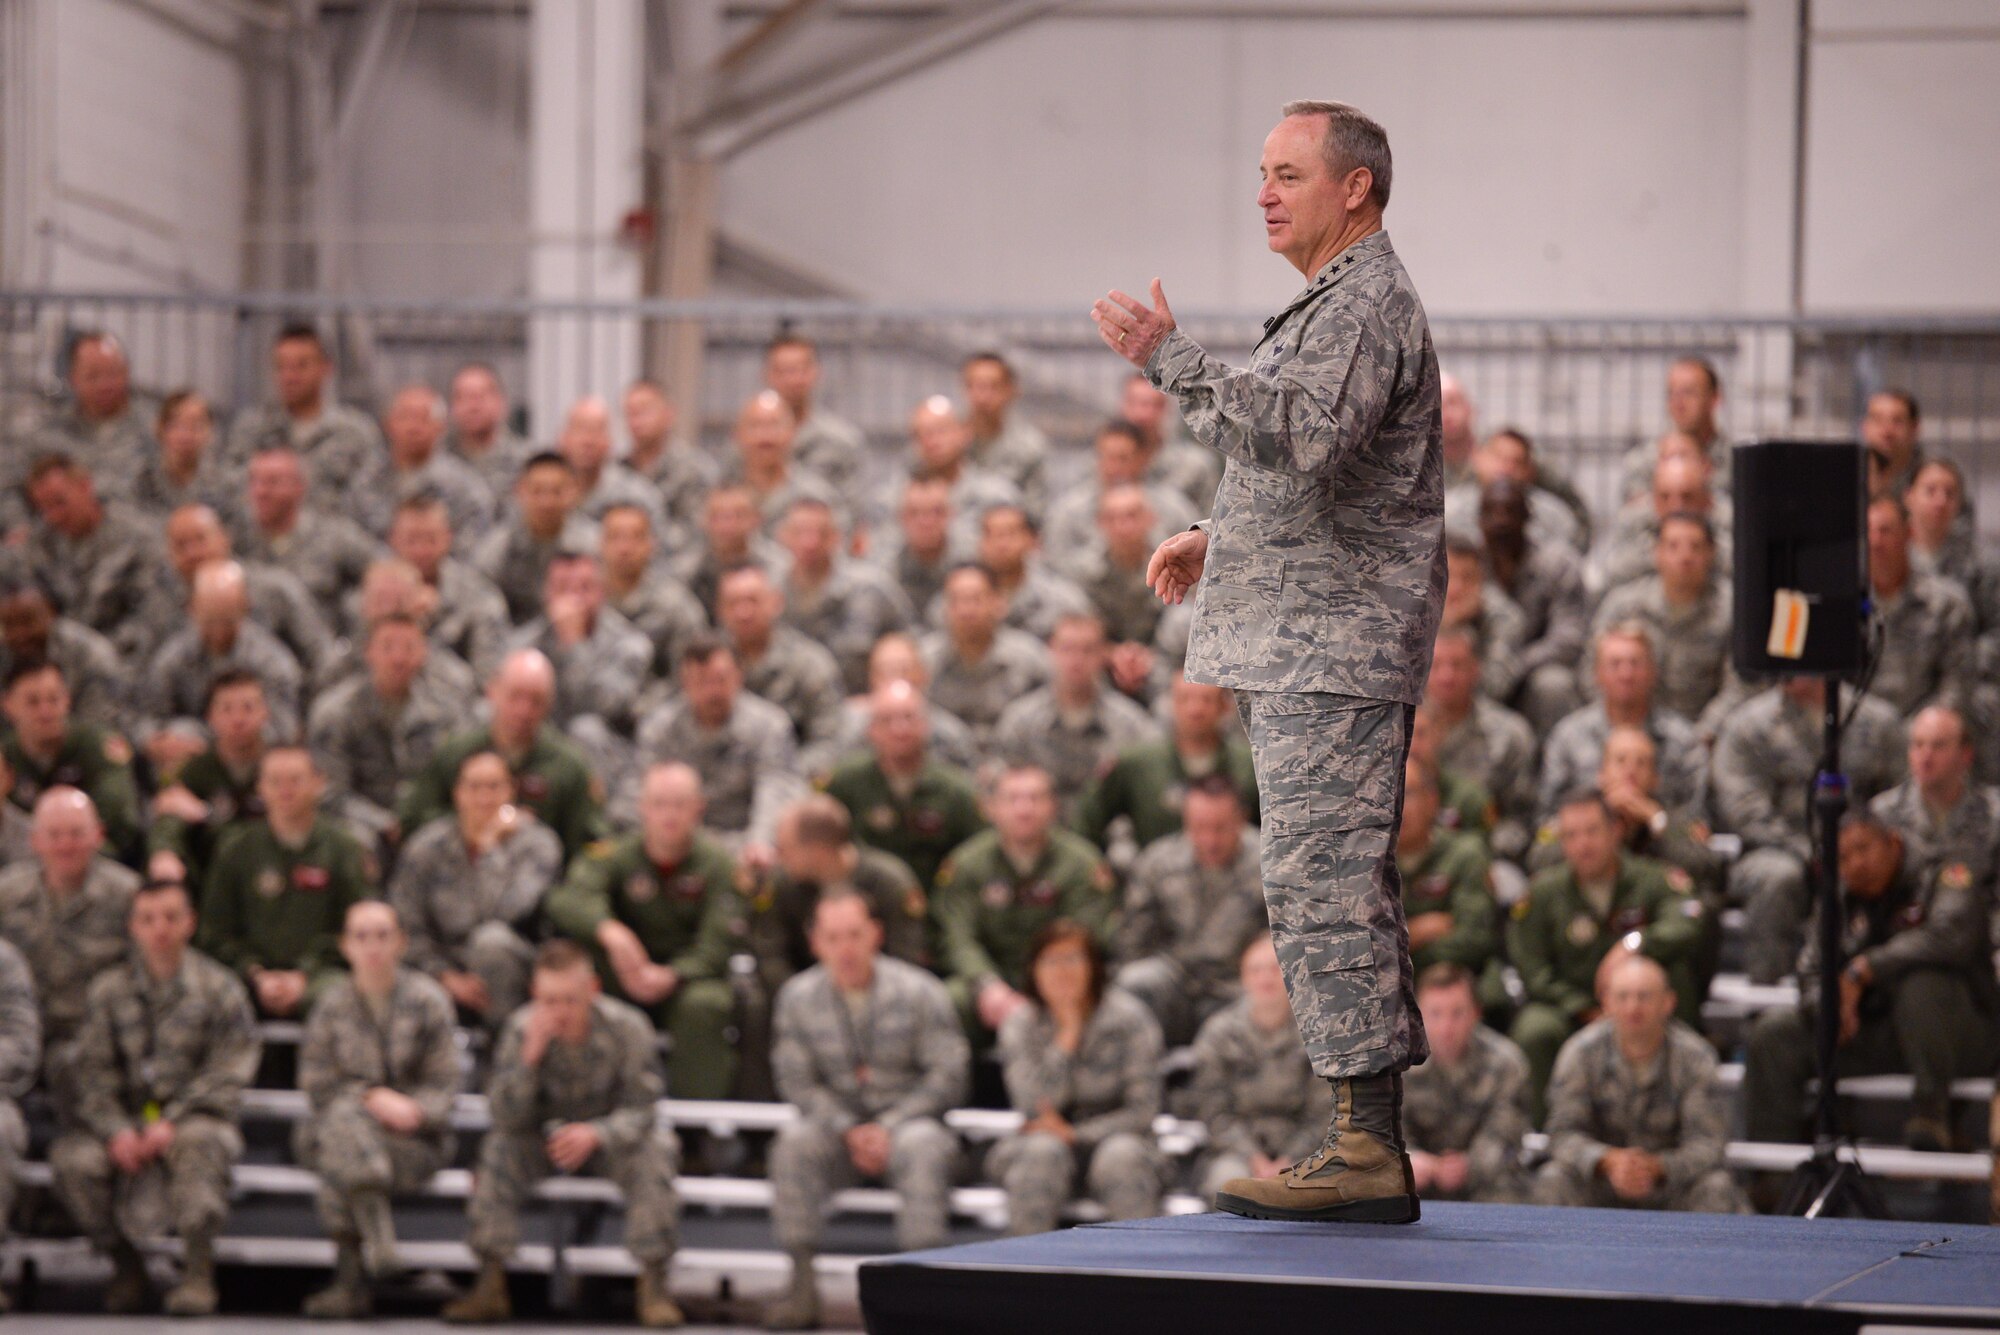 More than 1,000 Guard and Reserve Airmen had the opportunity to listen to Air Force Chief of Staff Gen. Mark A. Welsh III speak April 11, 2015, about key issues affecting the Air Force during a visit to Tinker Air Force Base, Okla. (U.S. Air Force photo/Staff Sgt. Caleb Wanzer) 